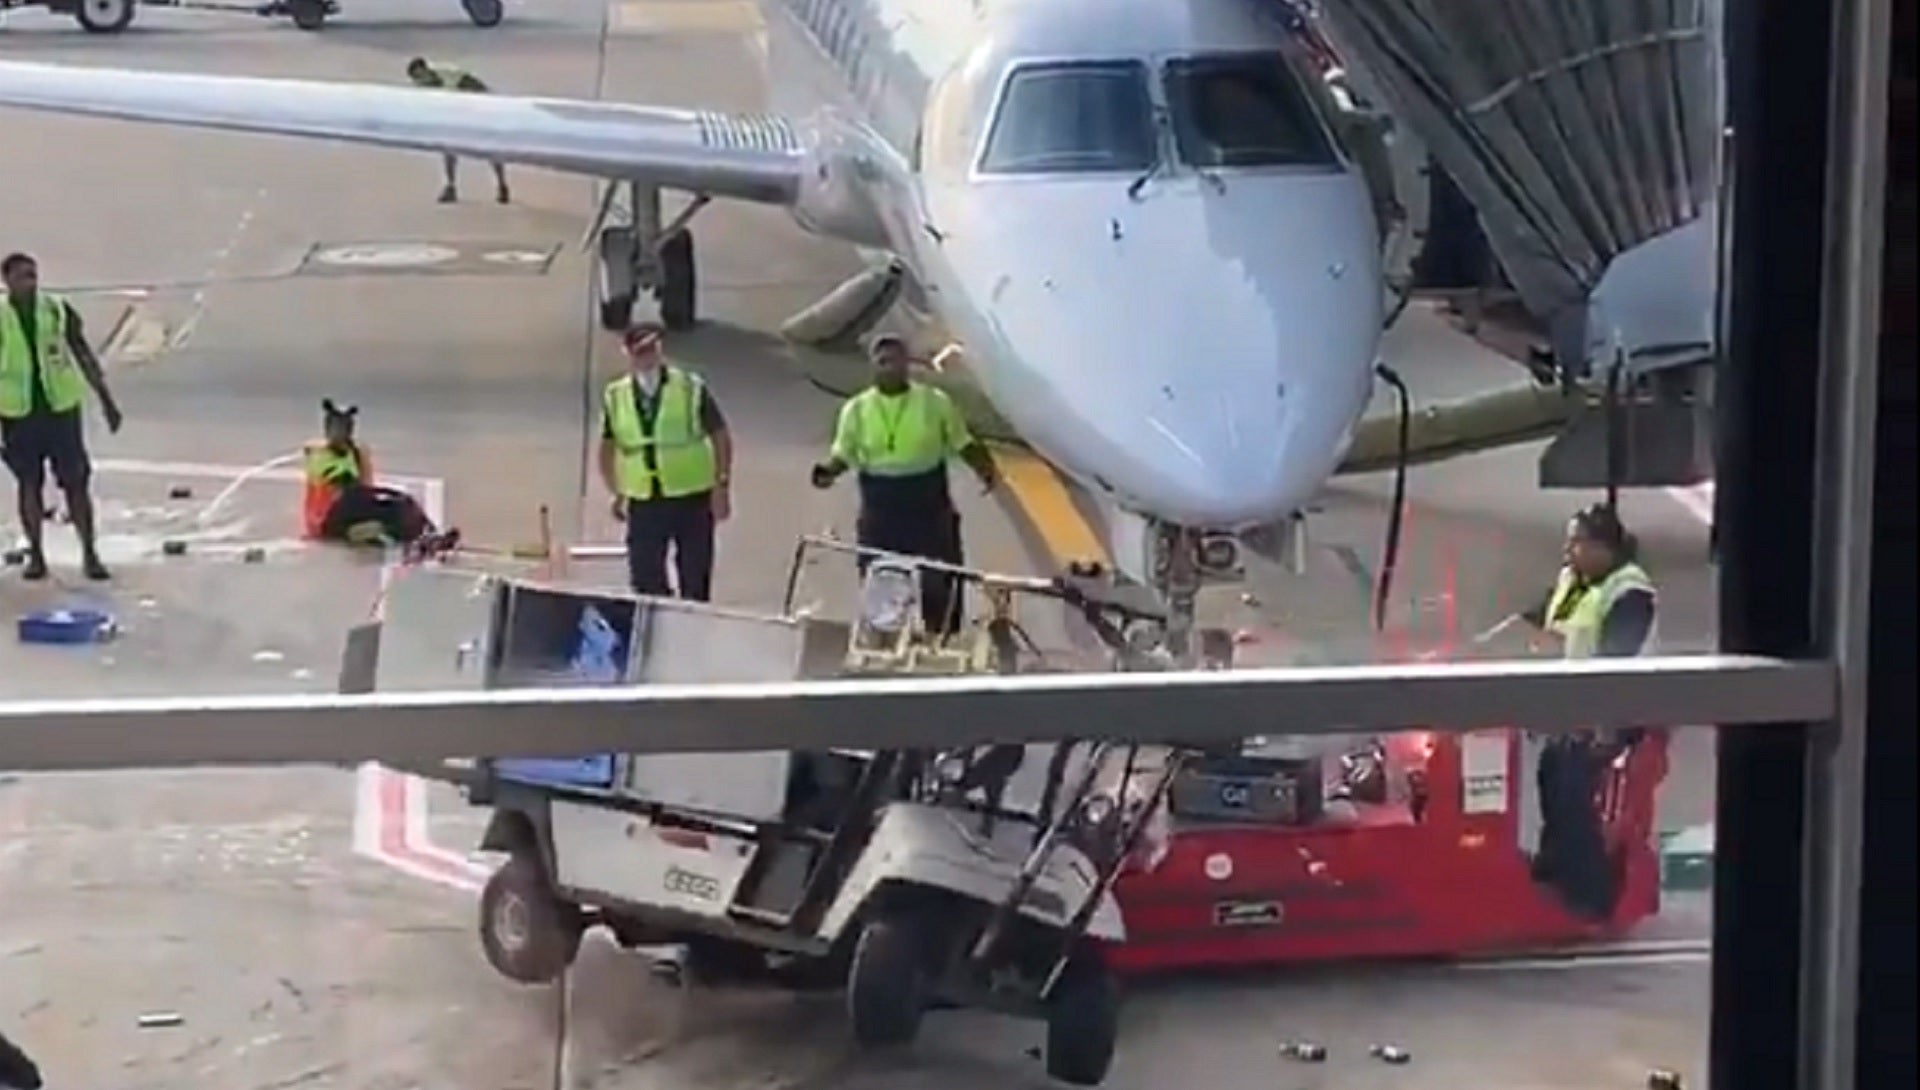 Man Saves Plane By Spearing Out-of-Control Utility Cart With Airport Vehicle